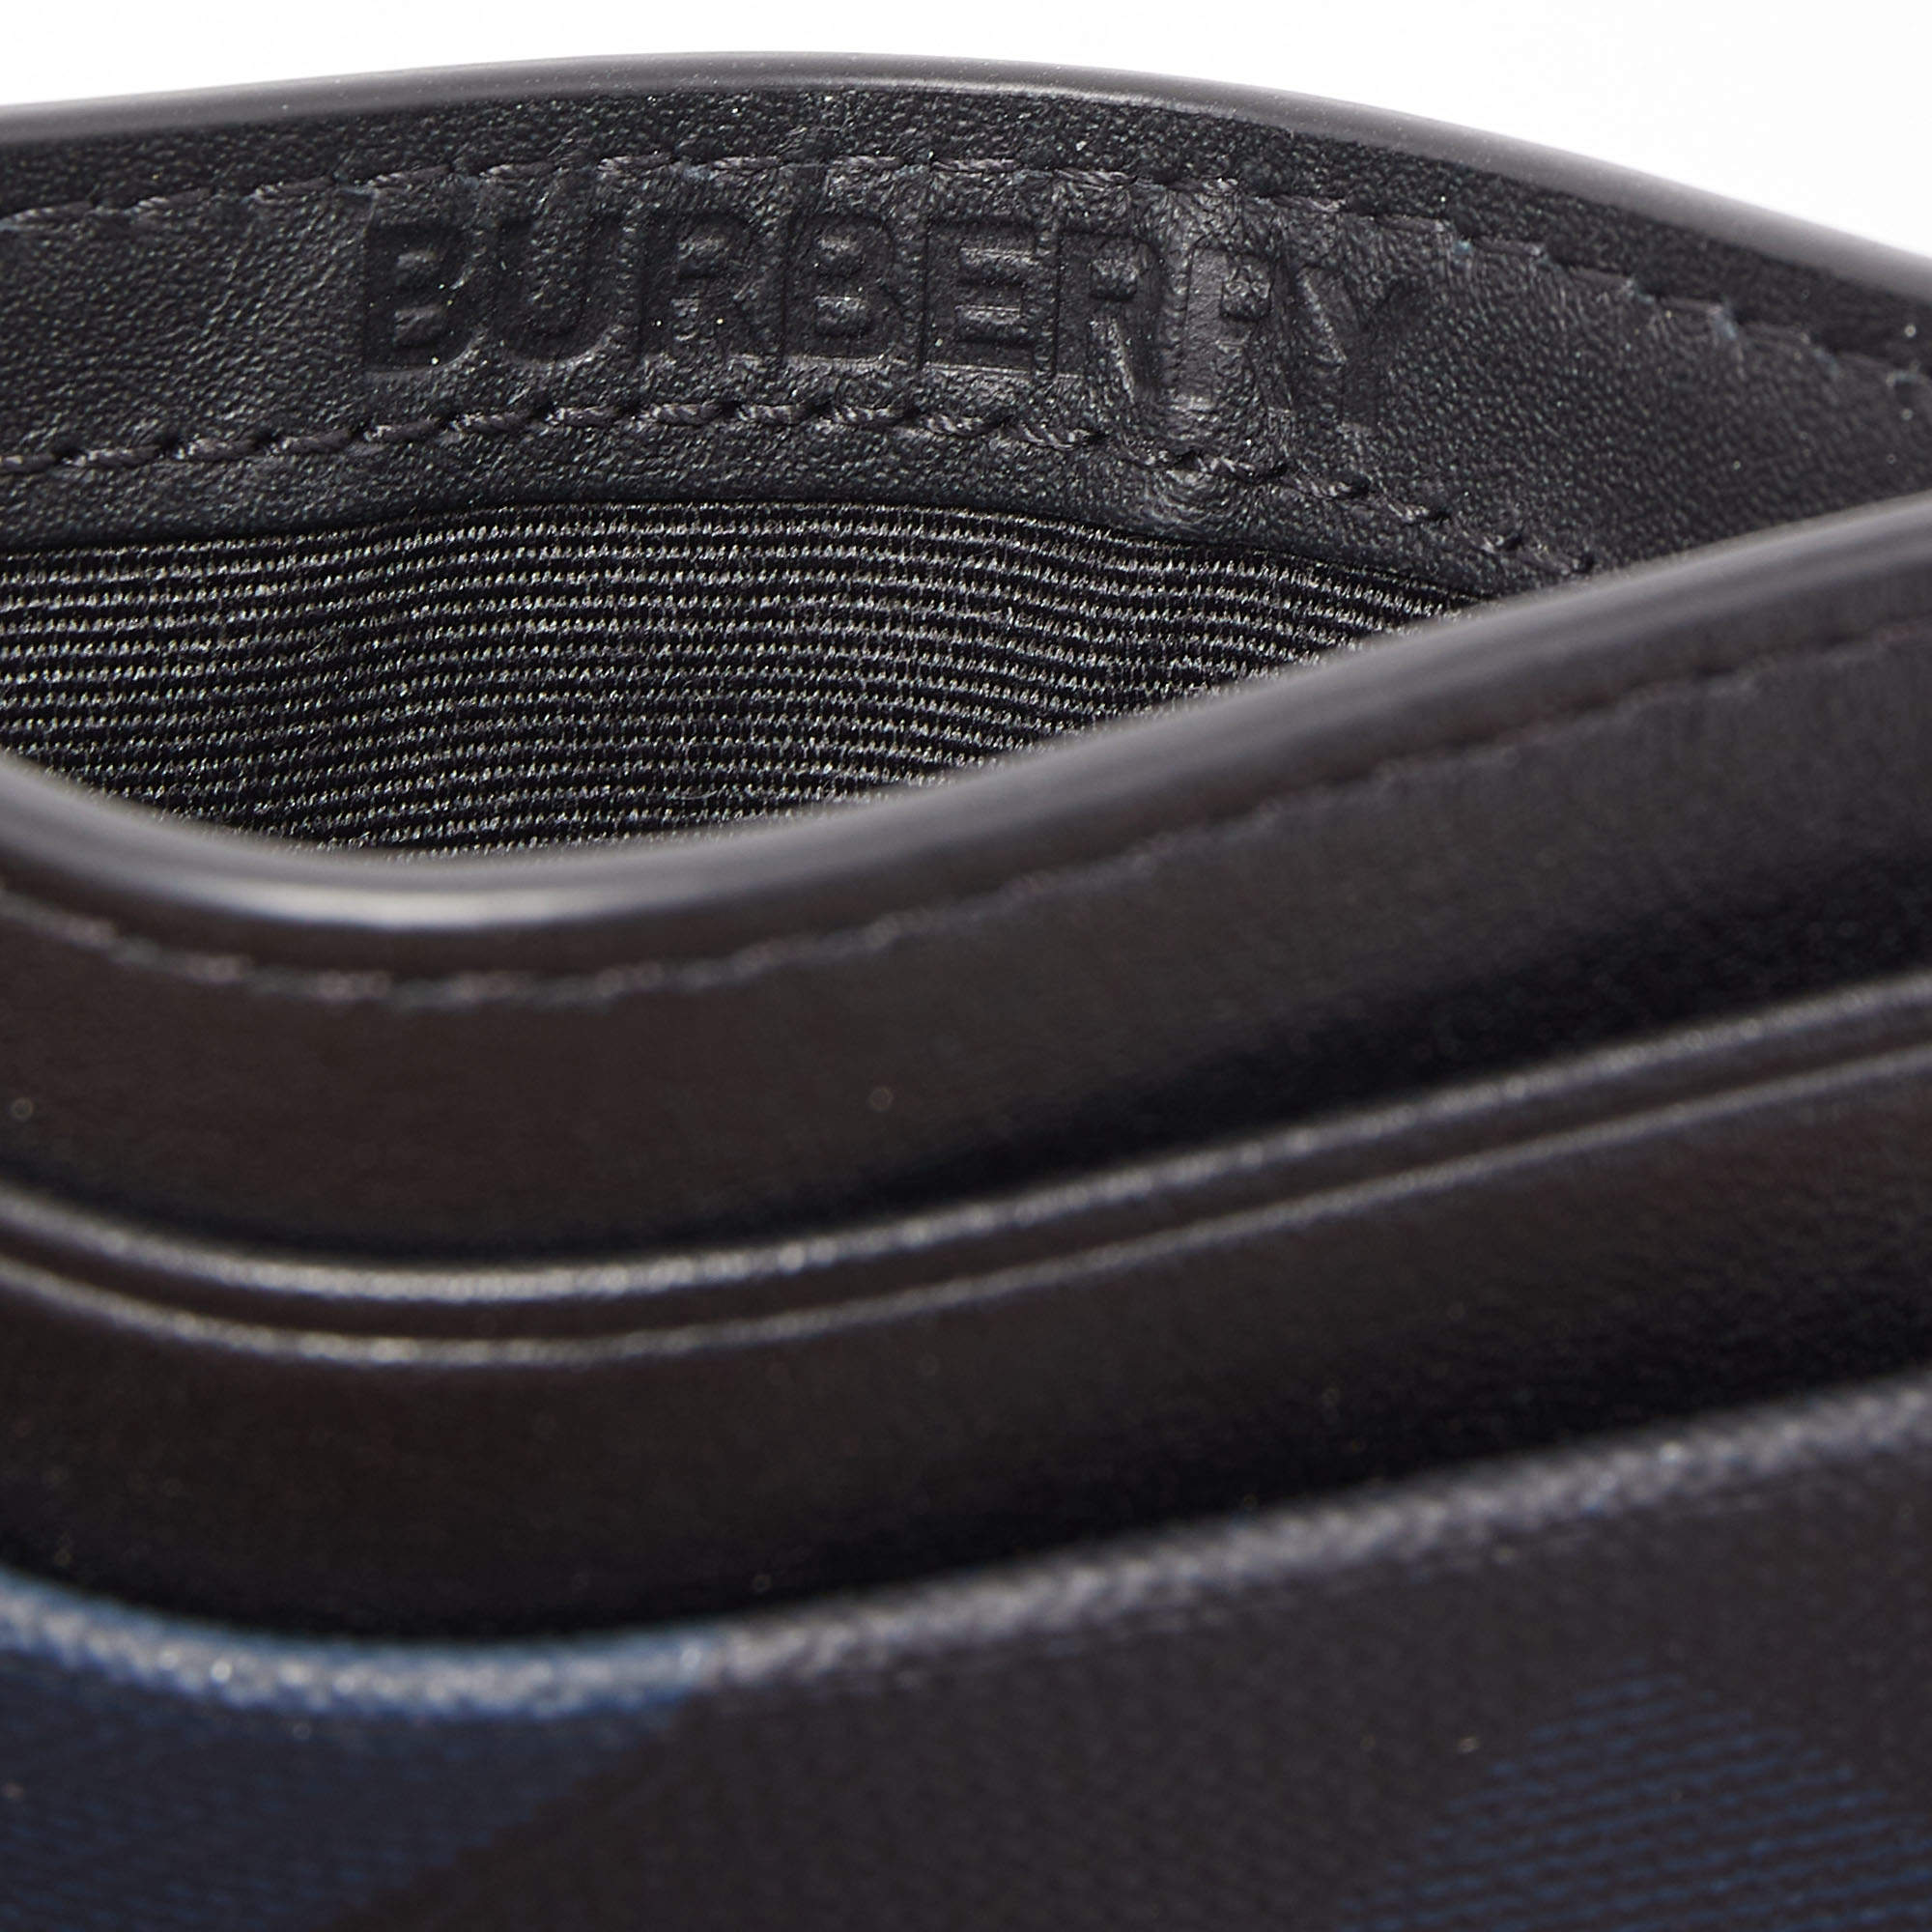 BURBERRY: Sandon credit card holder in coated fabric and leather - Black